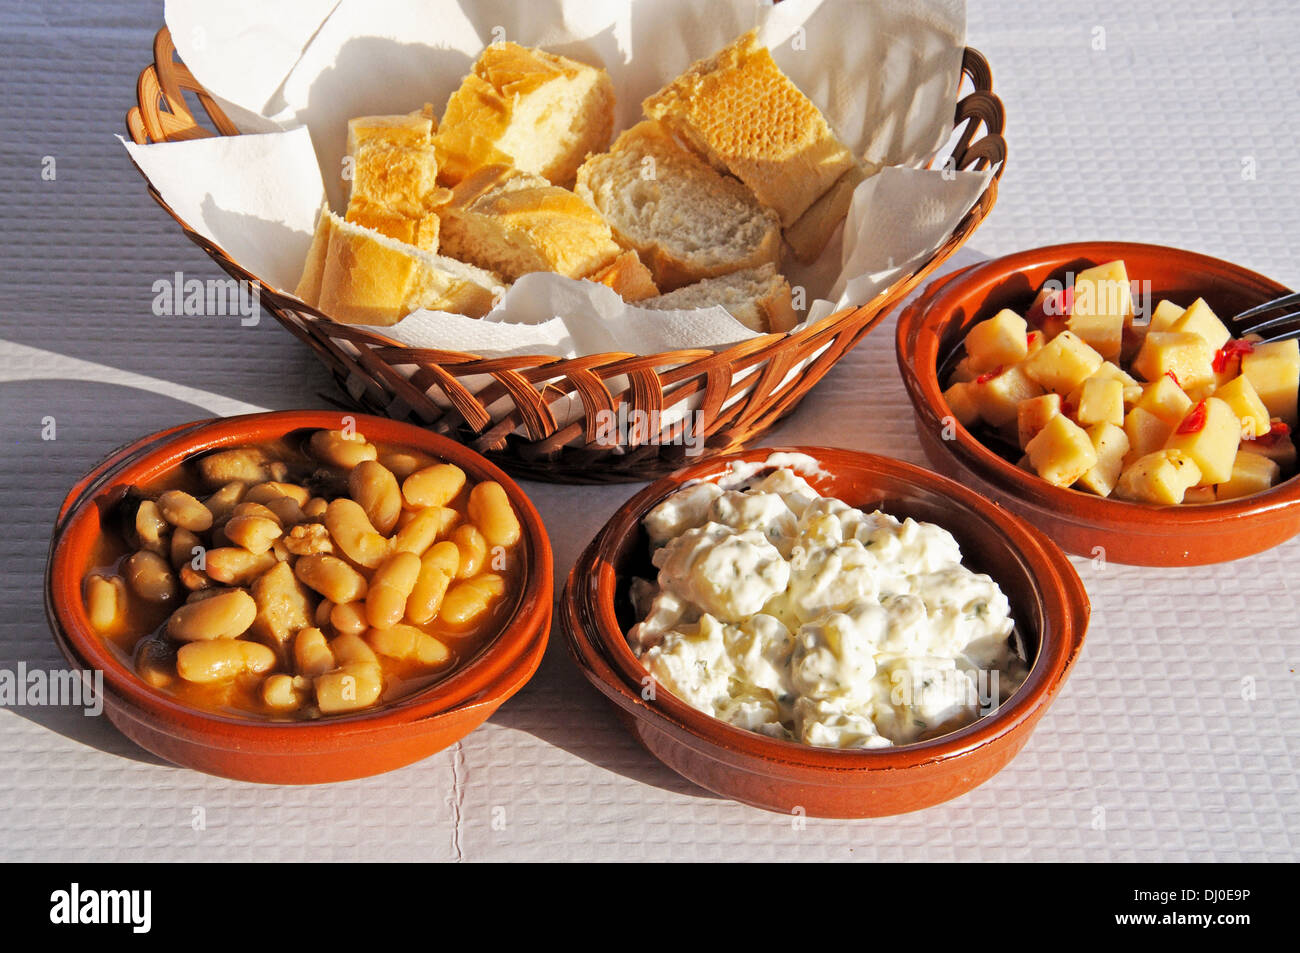 Selection of tapas - From left to right: White beans and pork (Alubias con Morro), Potato salad, Cubed Manchego cheese in oil. Stock Photo